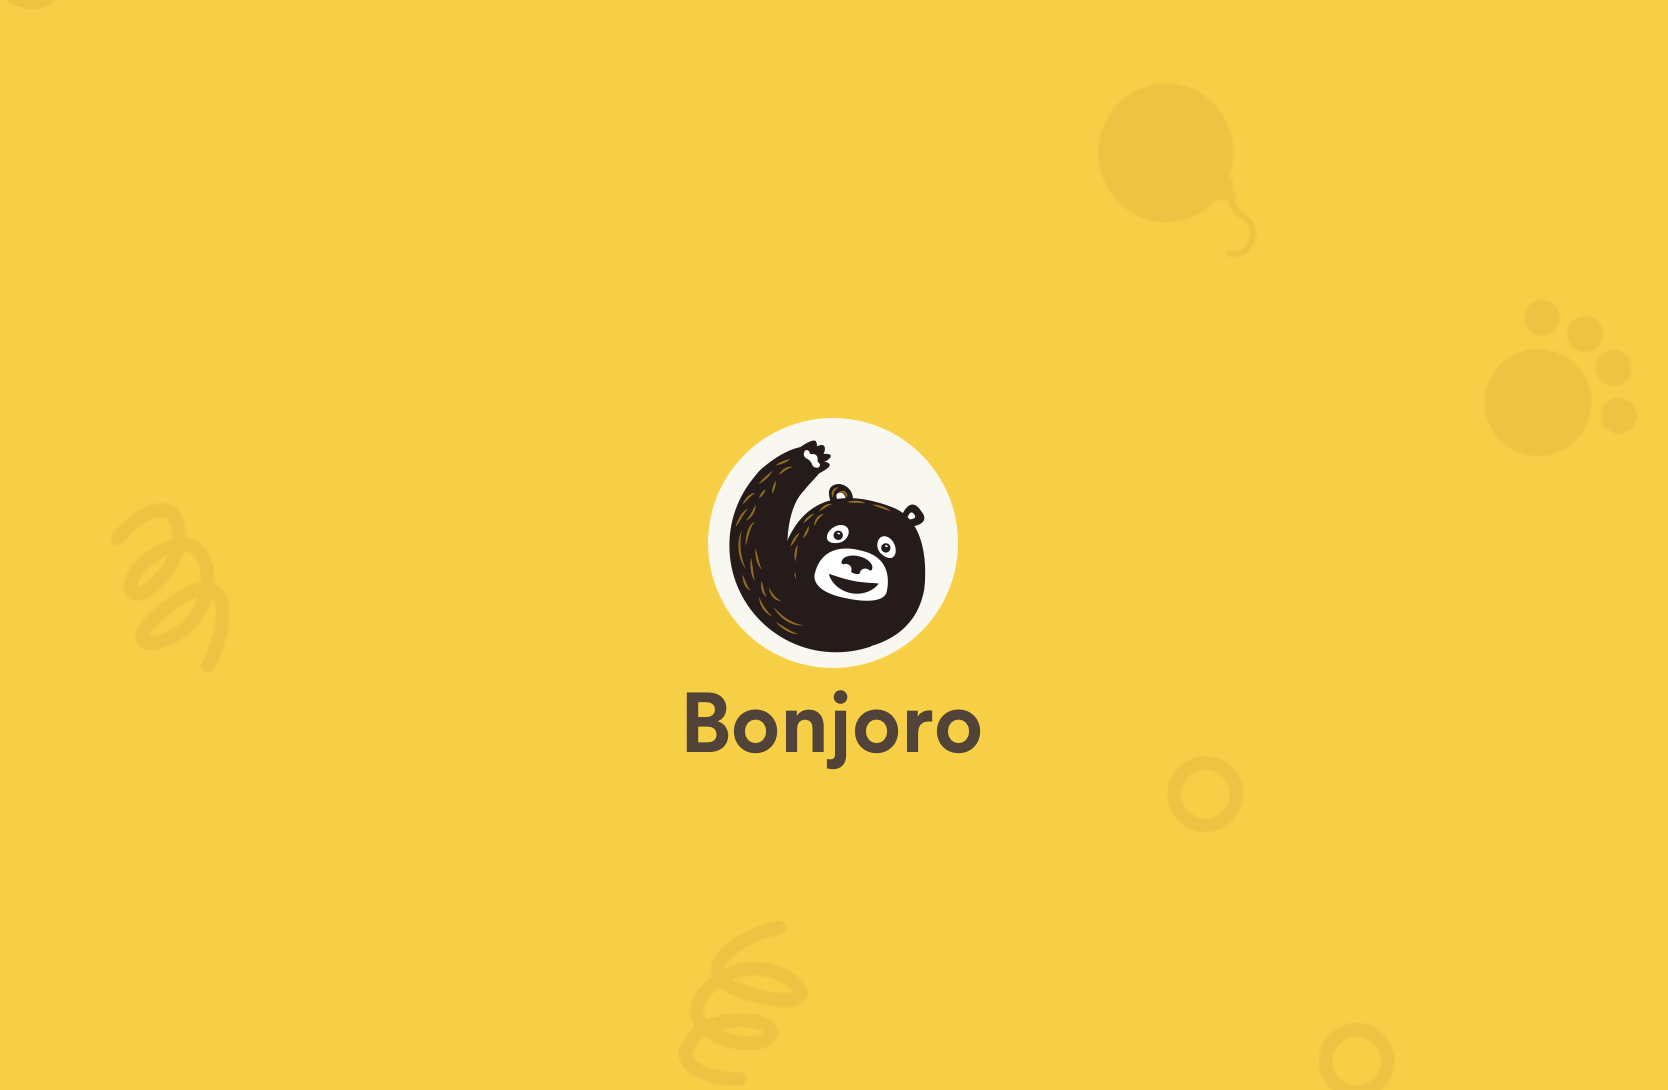 Replying to new wedding enquiries with Bonjoro